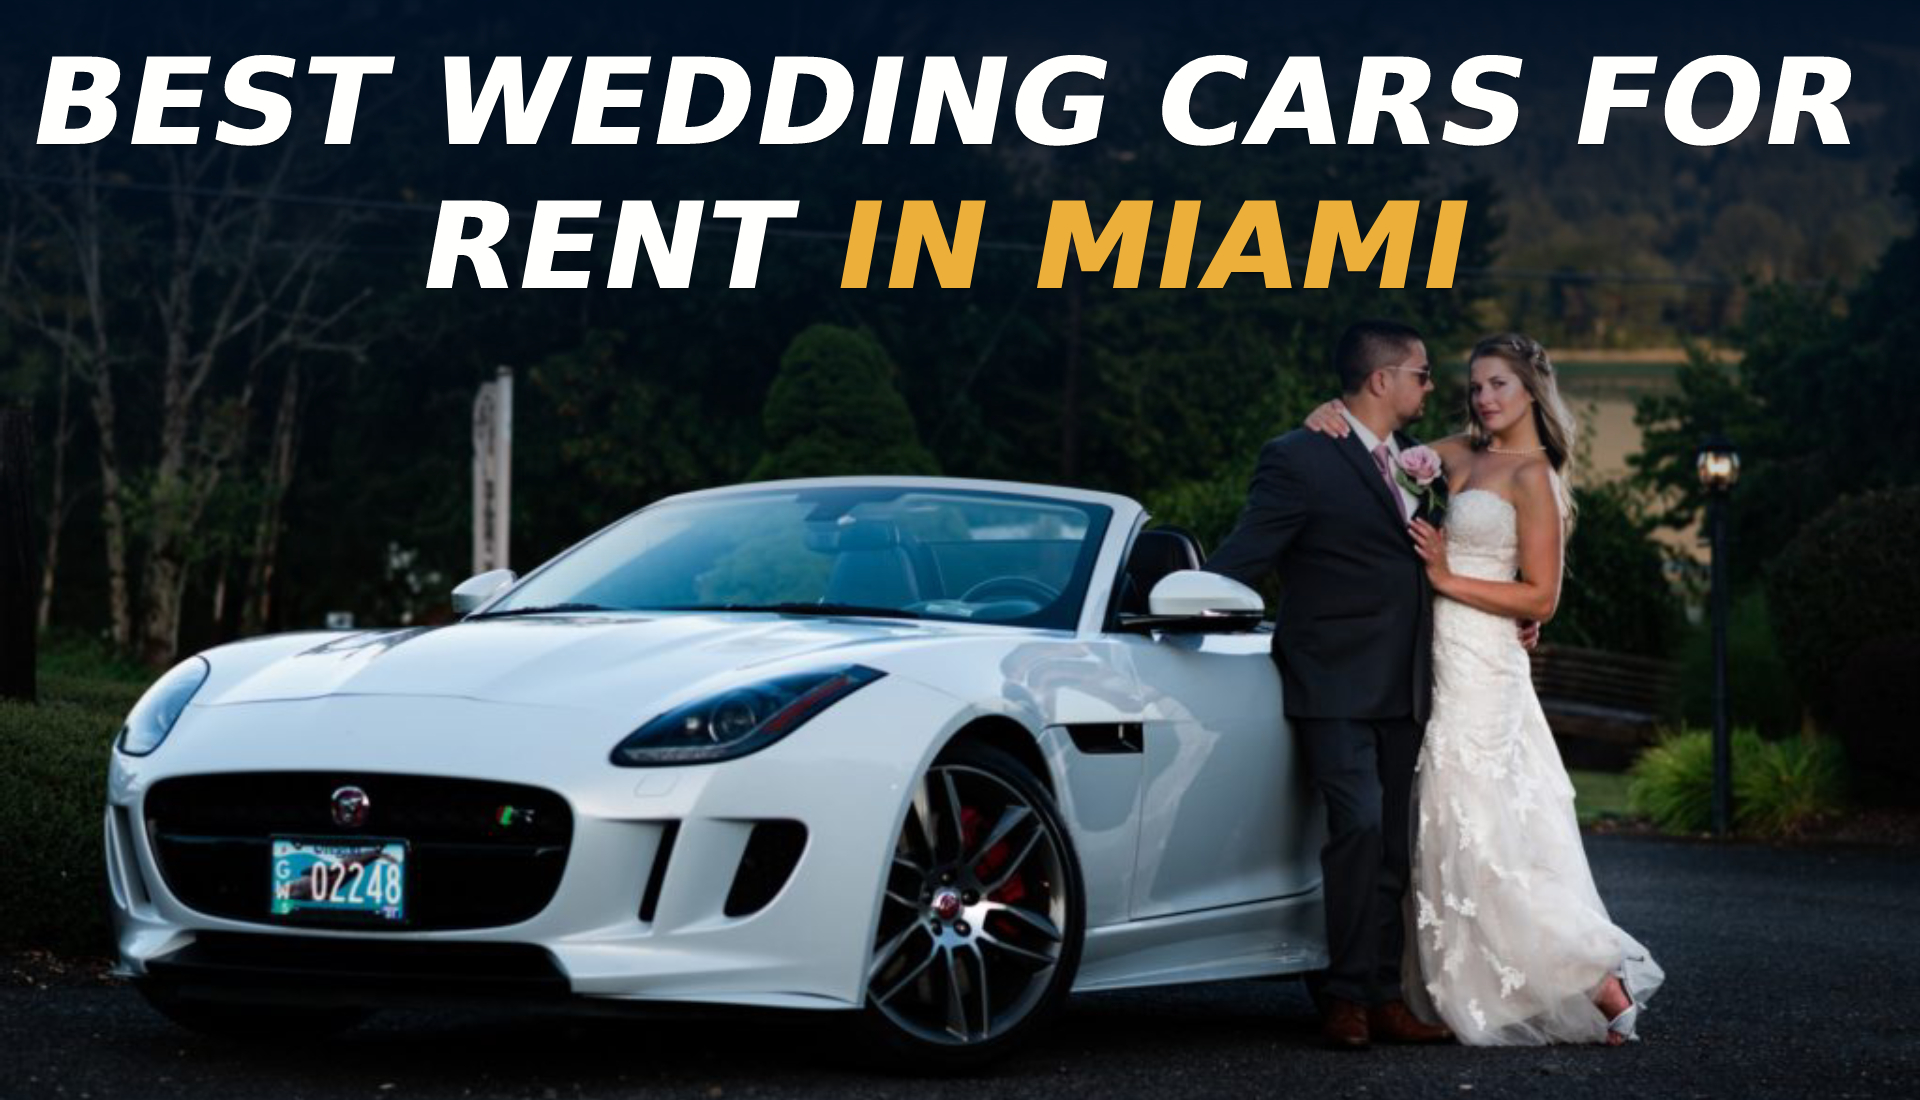 The Best Wedding Cars for Rent in Miami exotic rental cars yacht charters Miami